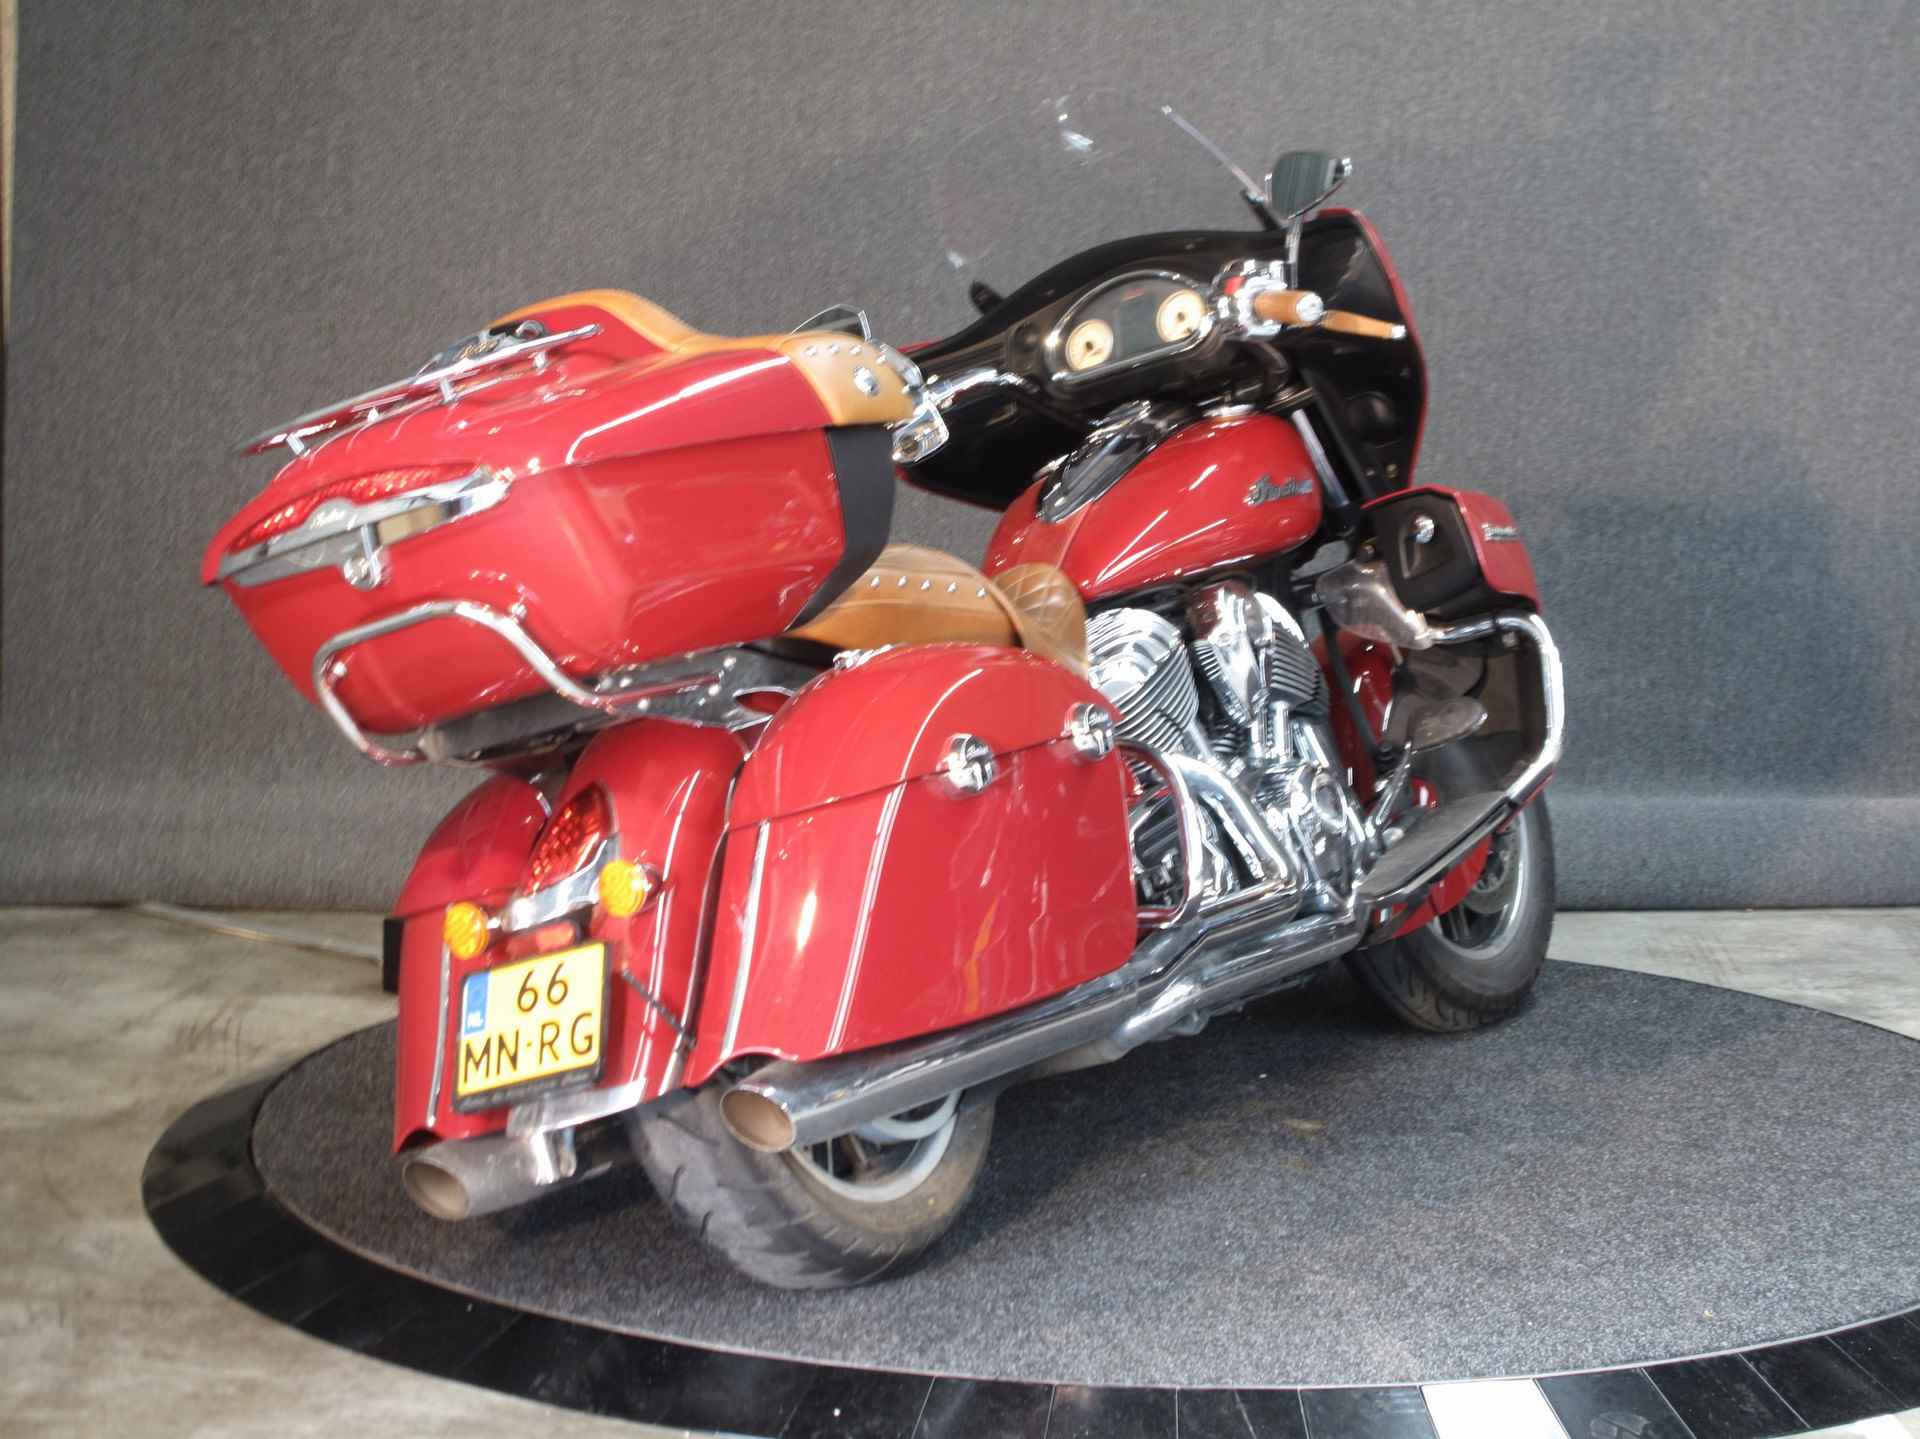 Indian Roadmaster The official Indian Motorcycle Dealer - 4/13